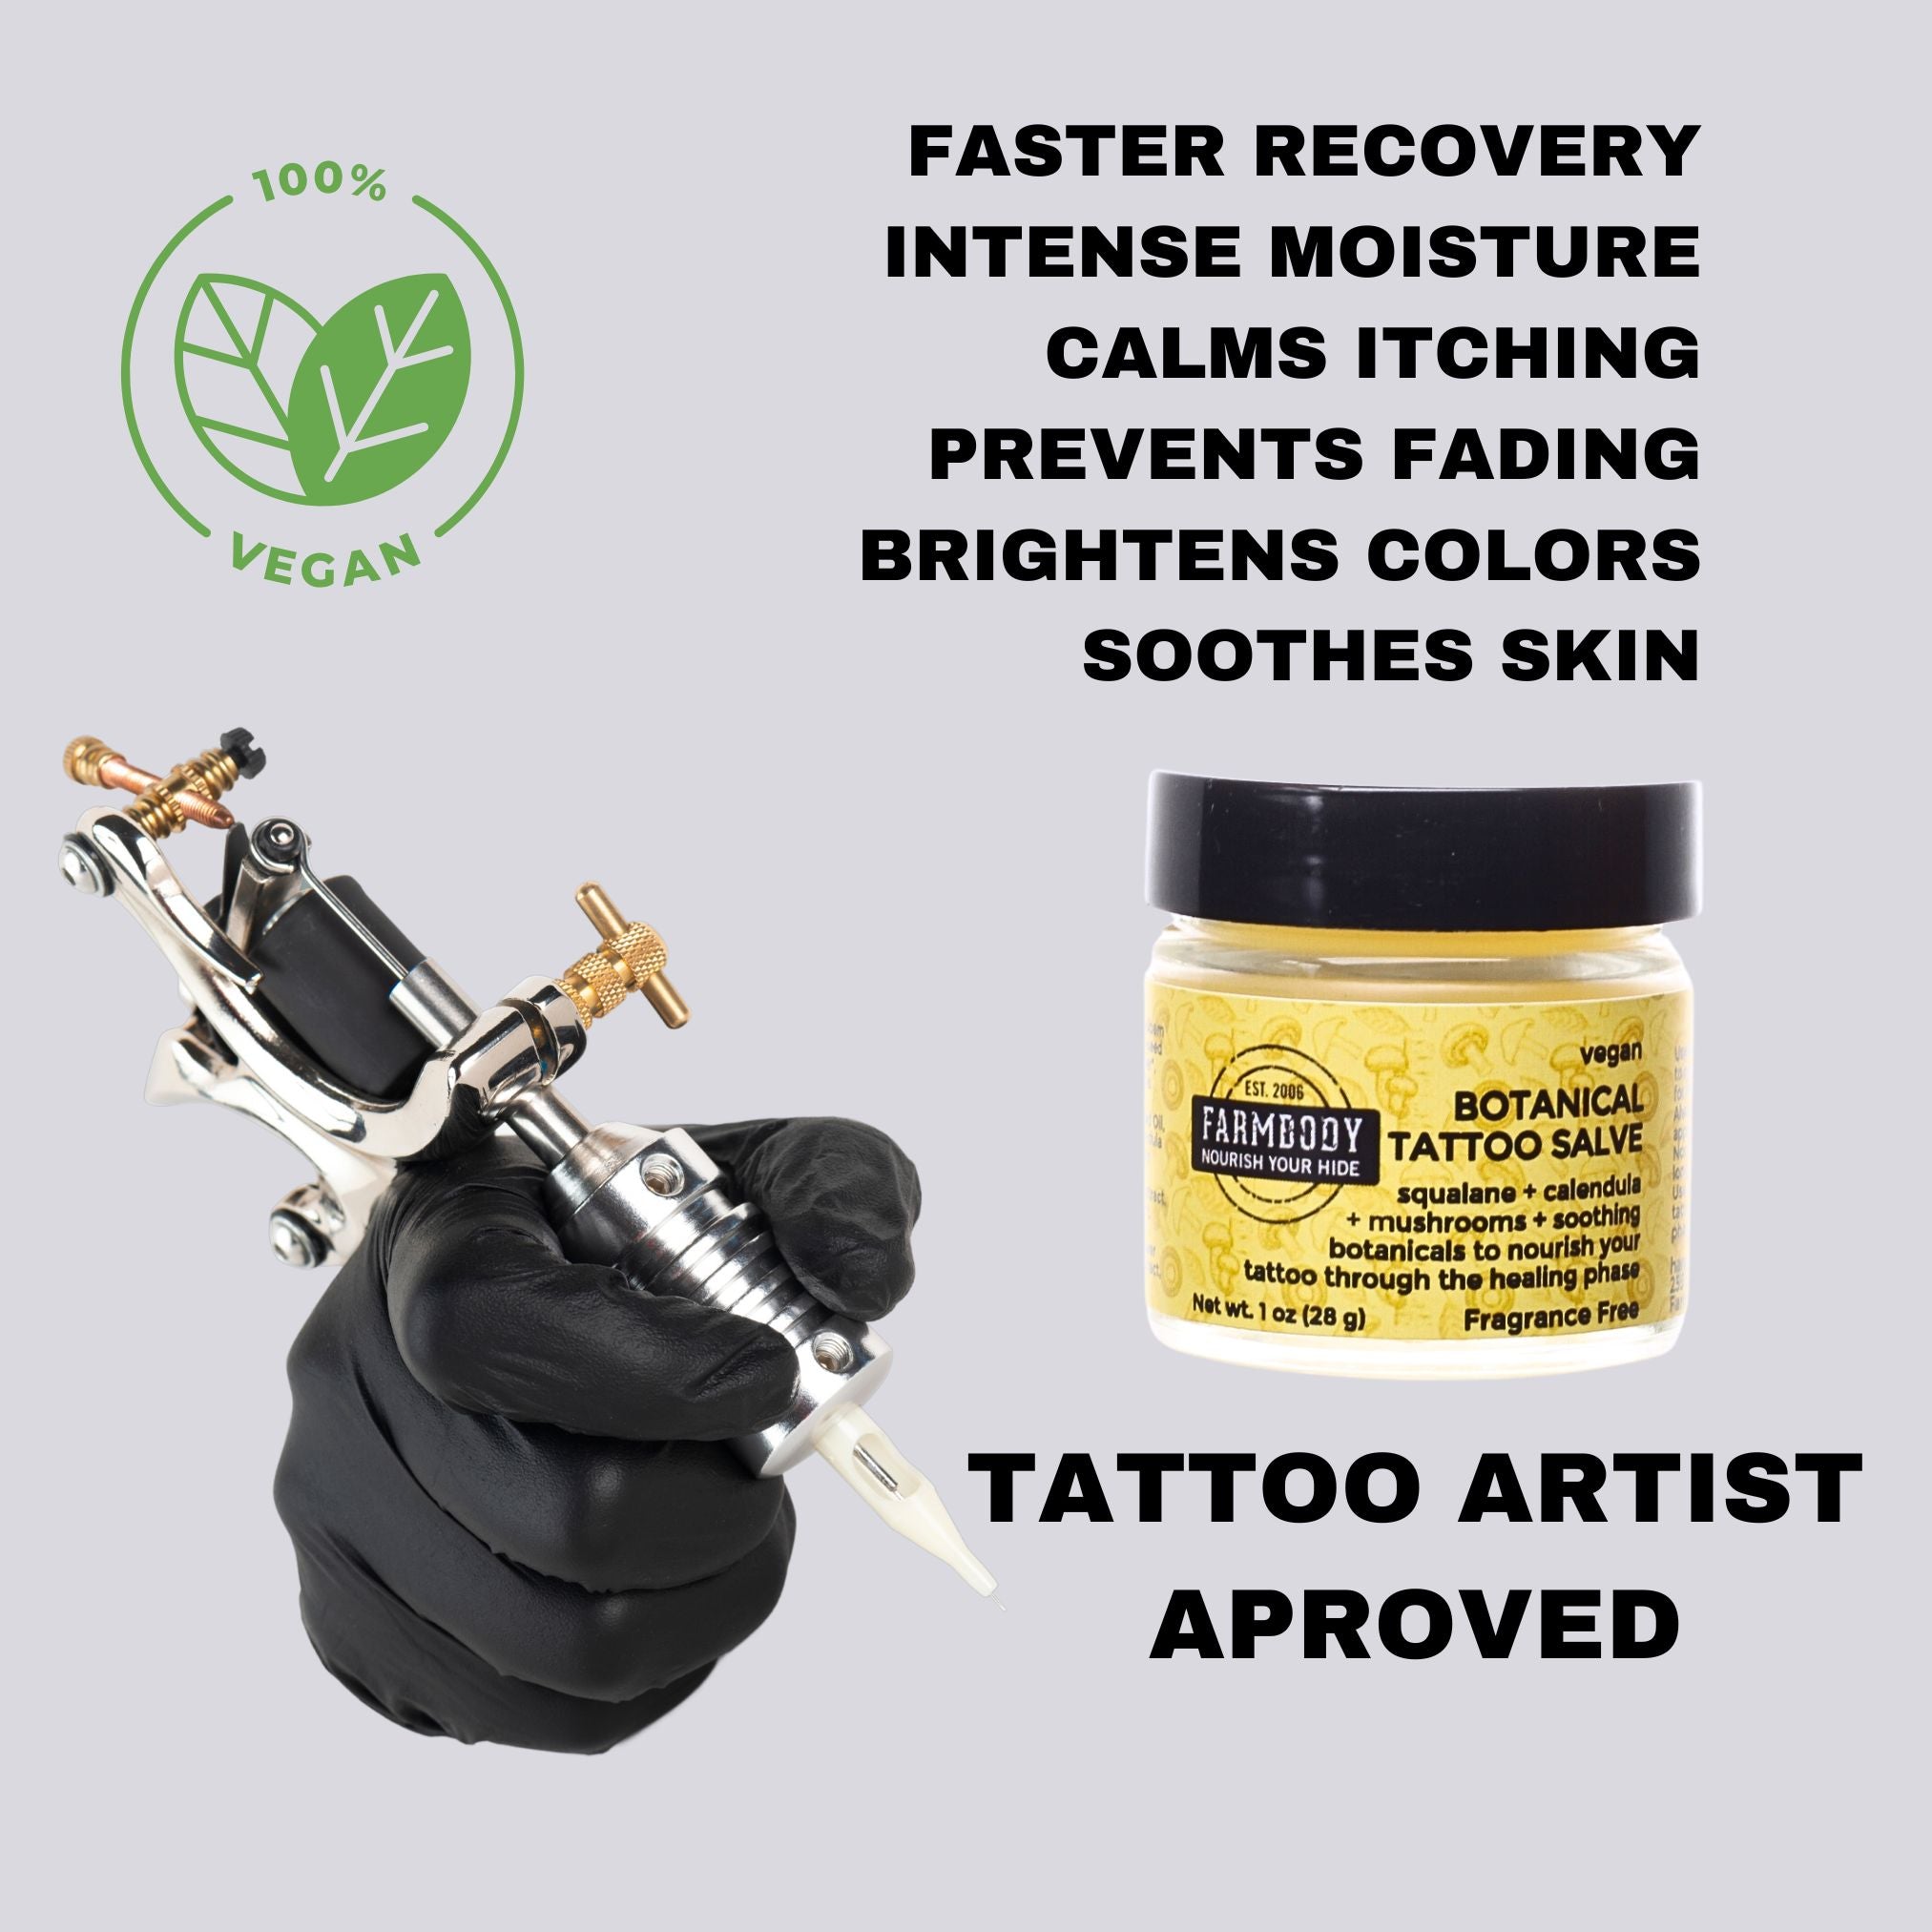 Farmbody botanical tattoo aftercare is tattoo artis aproved for faster recovery and to prevent fading keeps colors bright